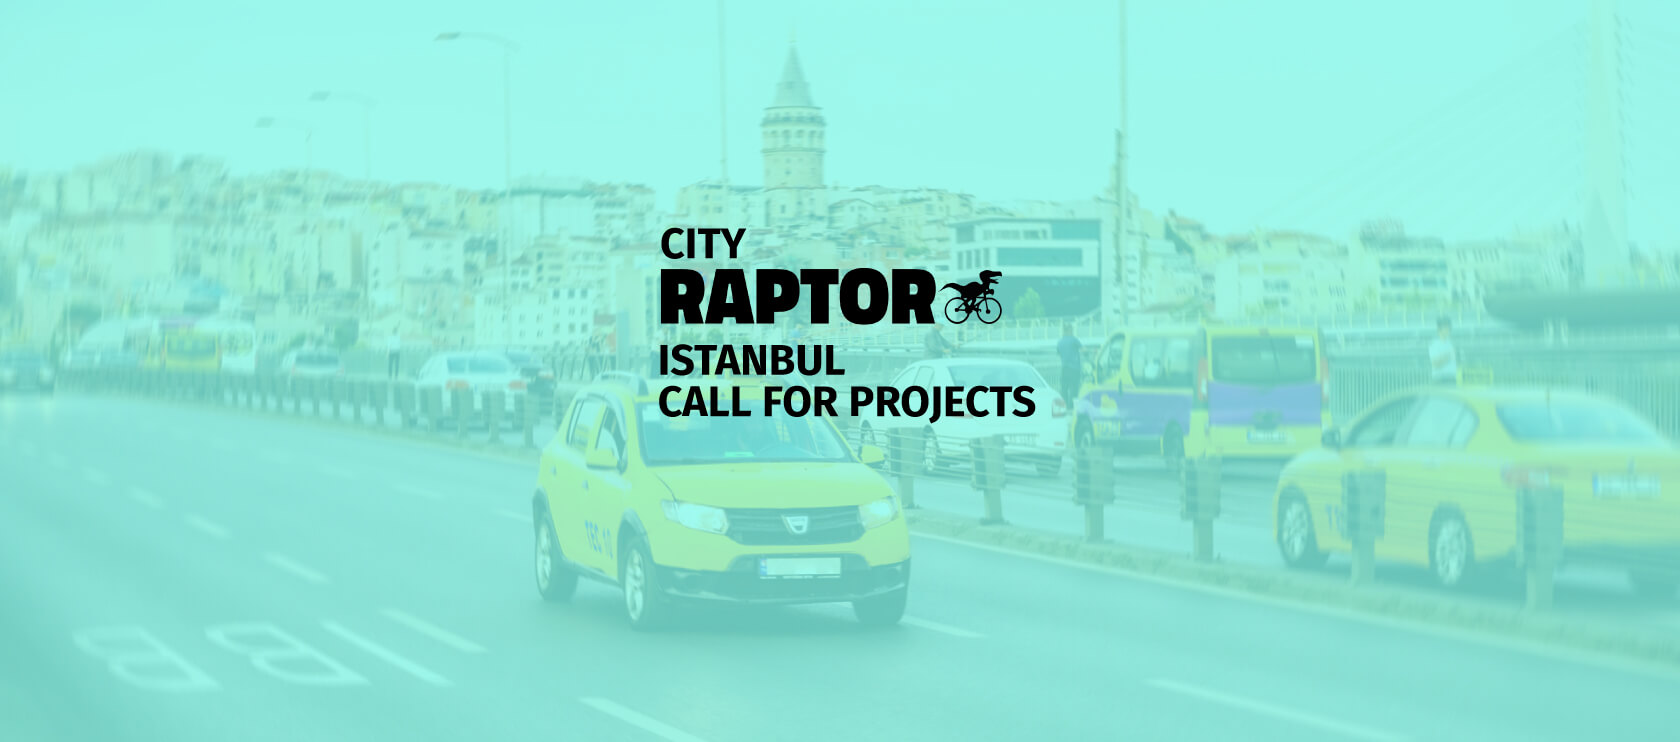 The City RAPTOR Istanbul Is Now Accepting Applications For A 90,000 Euro Urban Mobility Competition